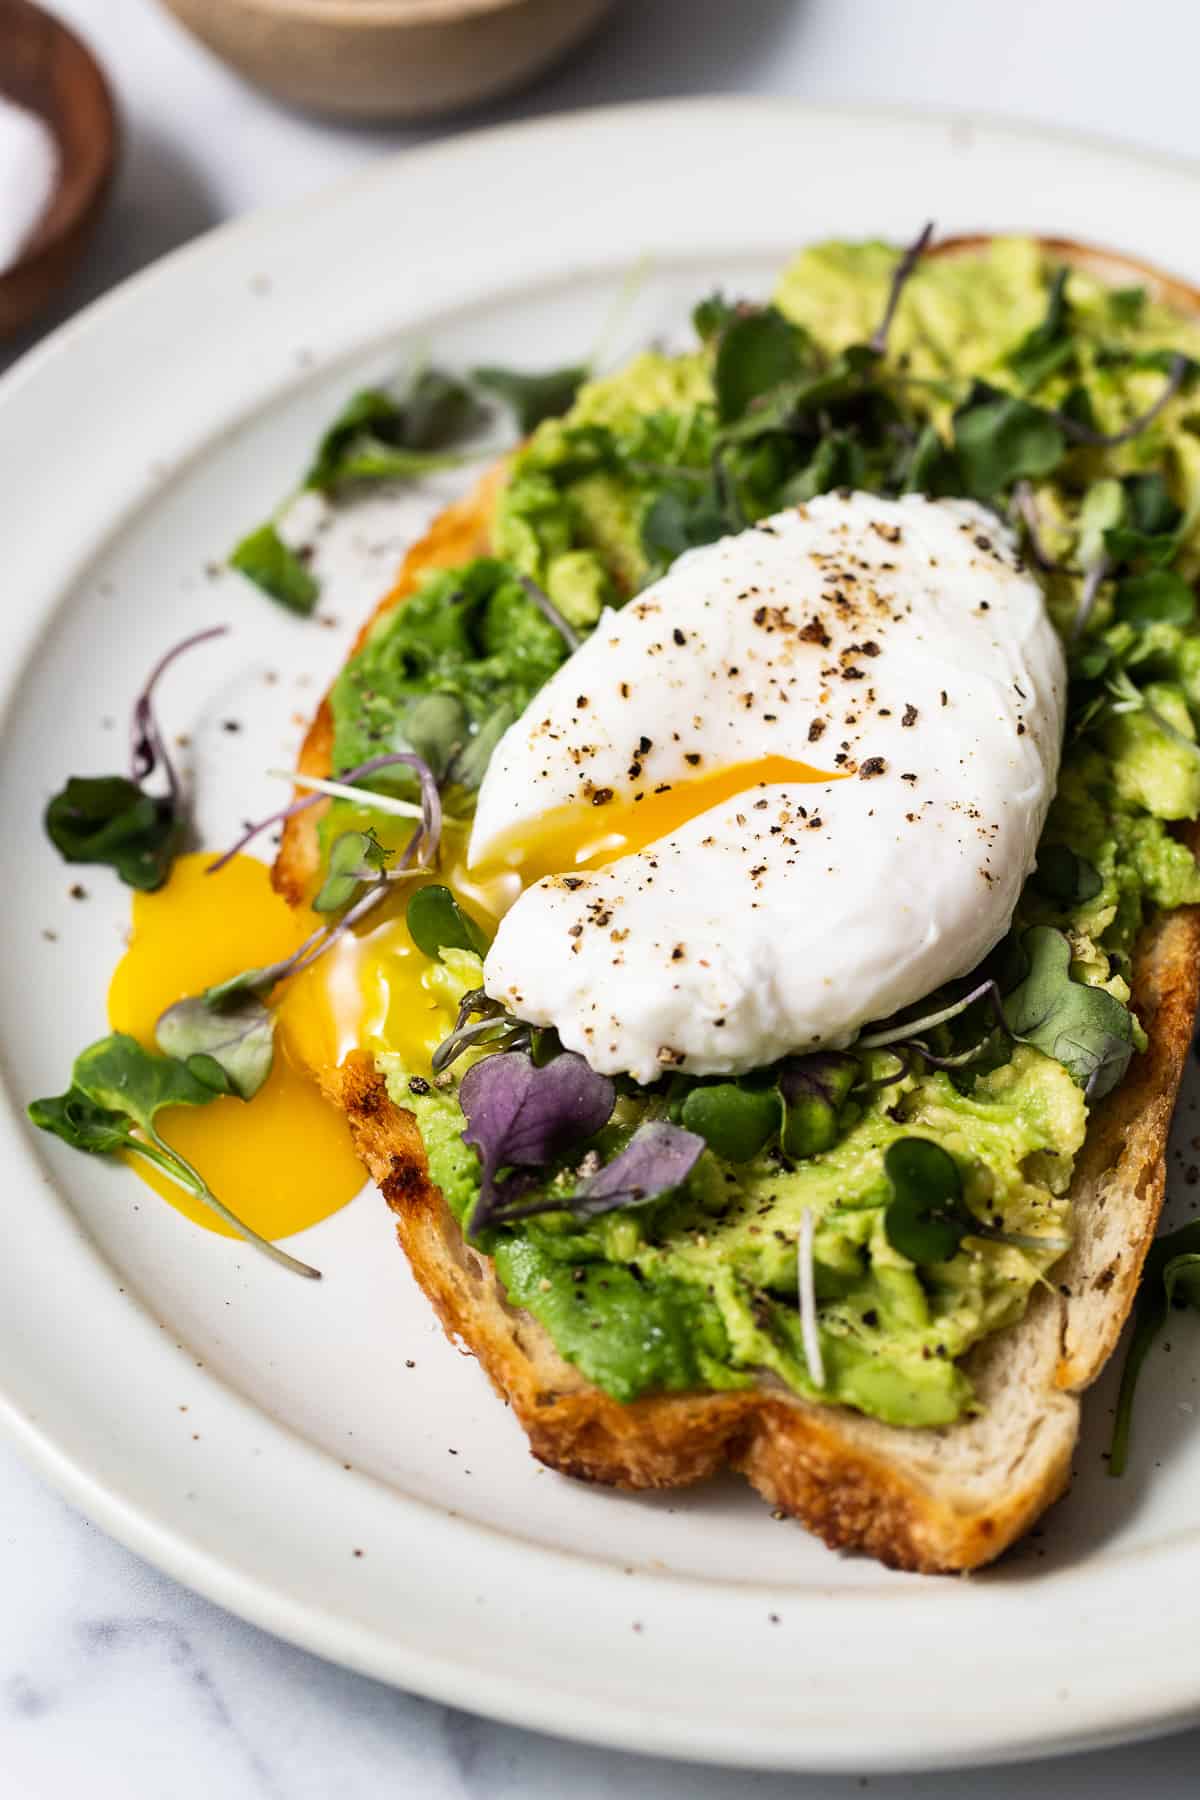 Poached egg with avocado toast on a plate.